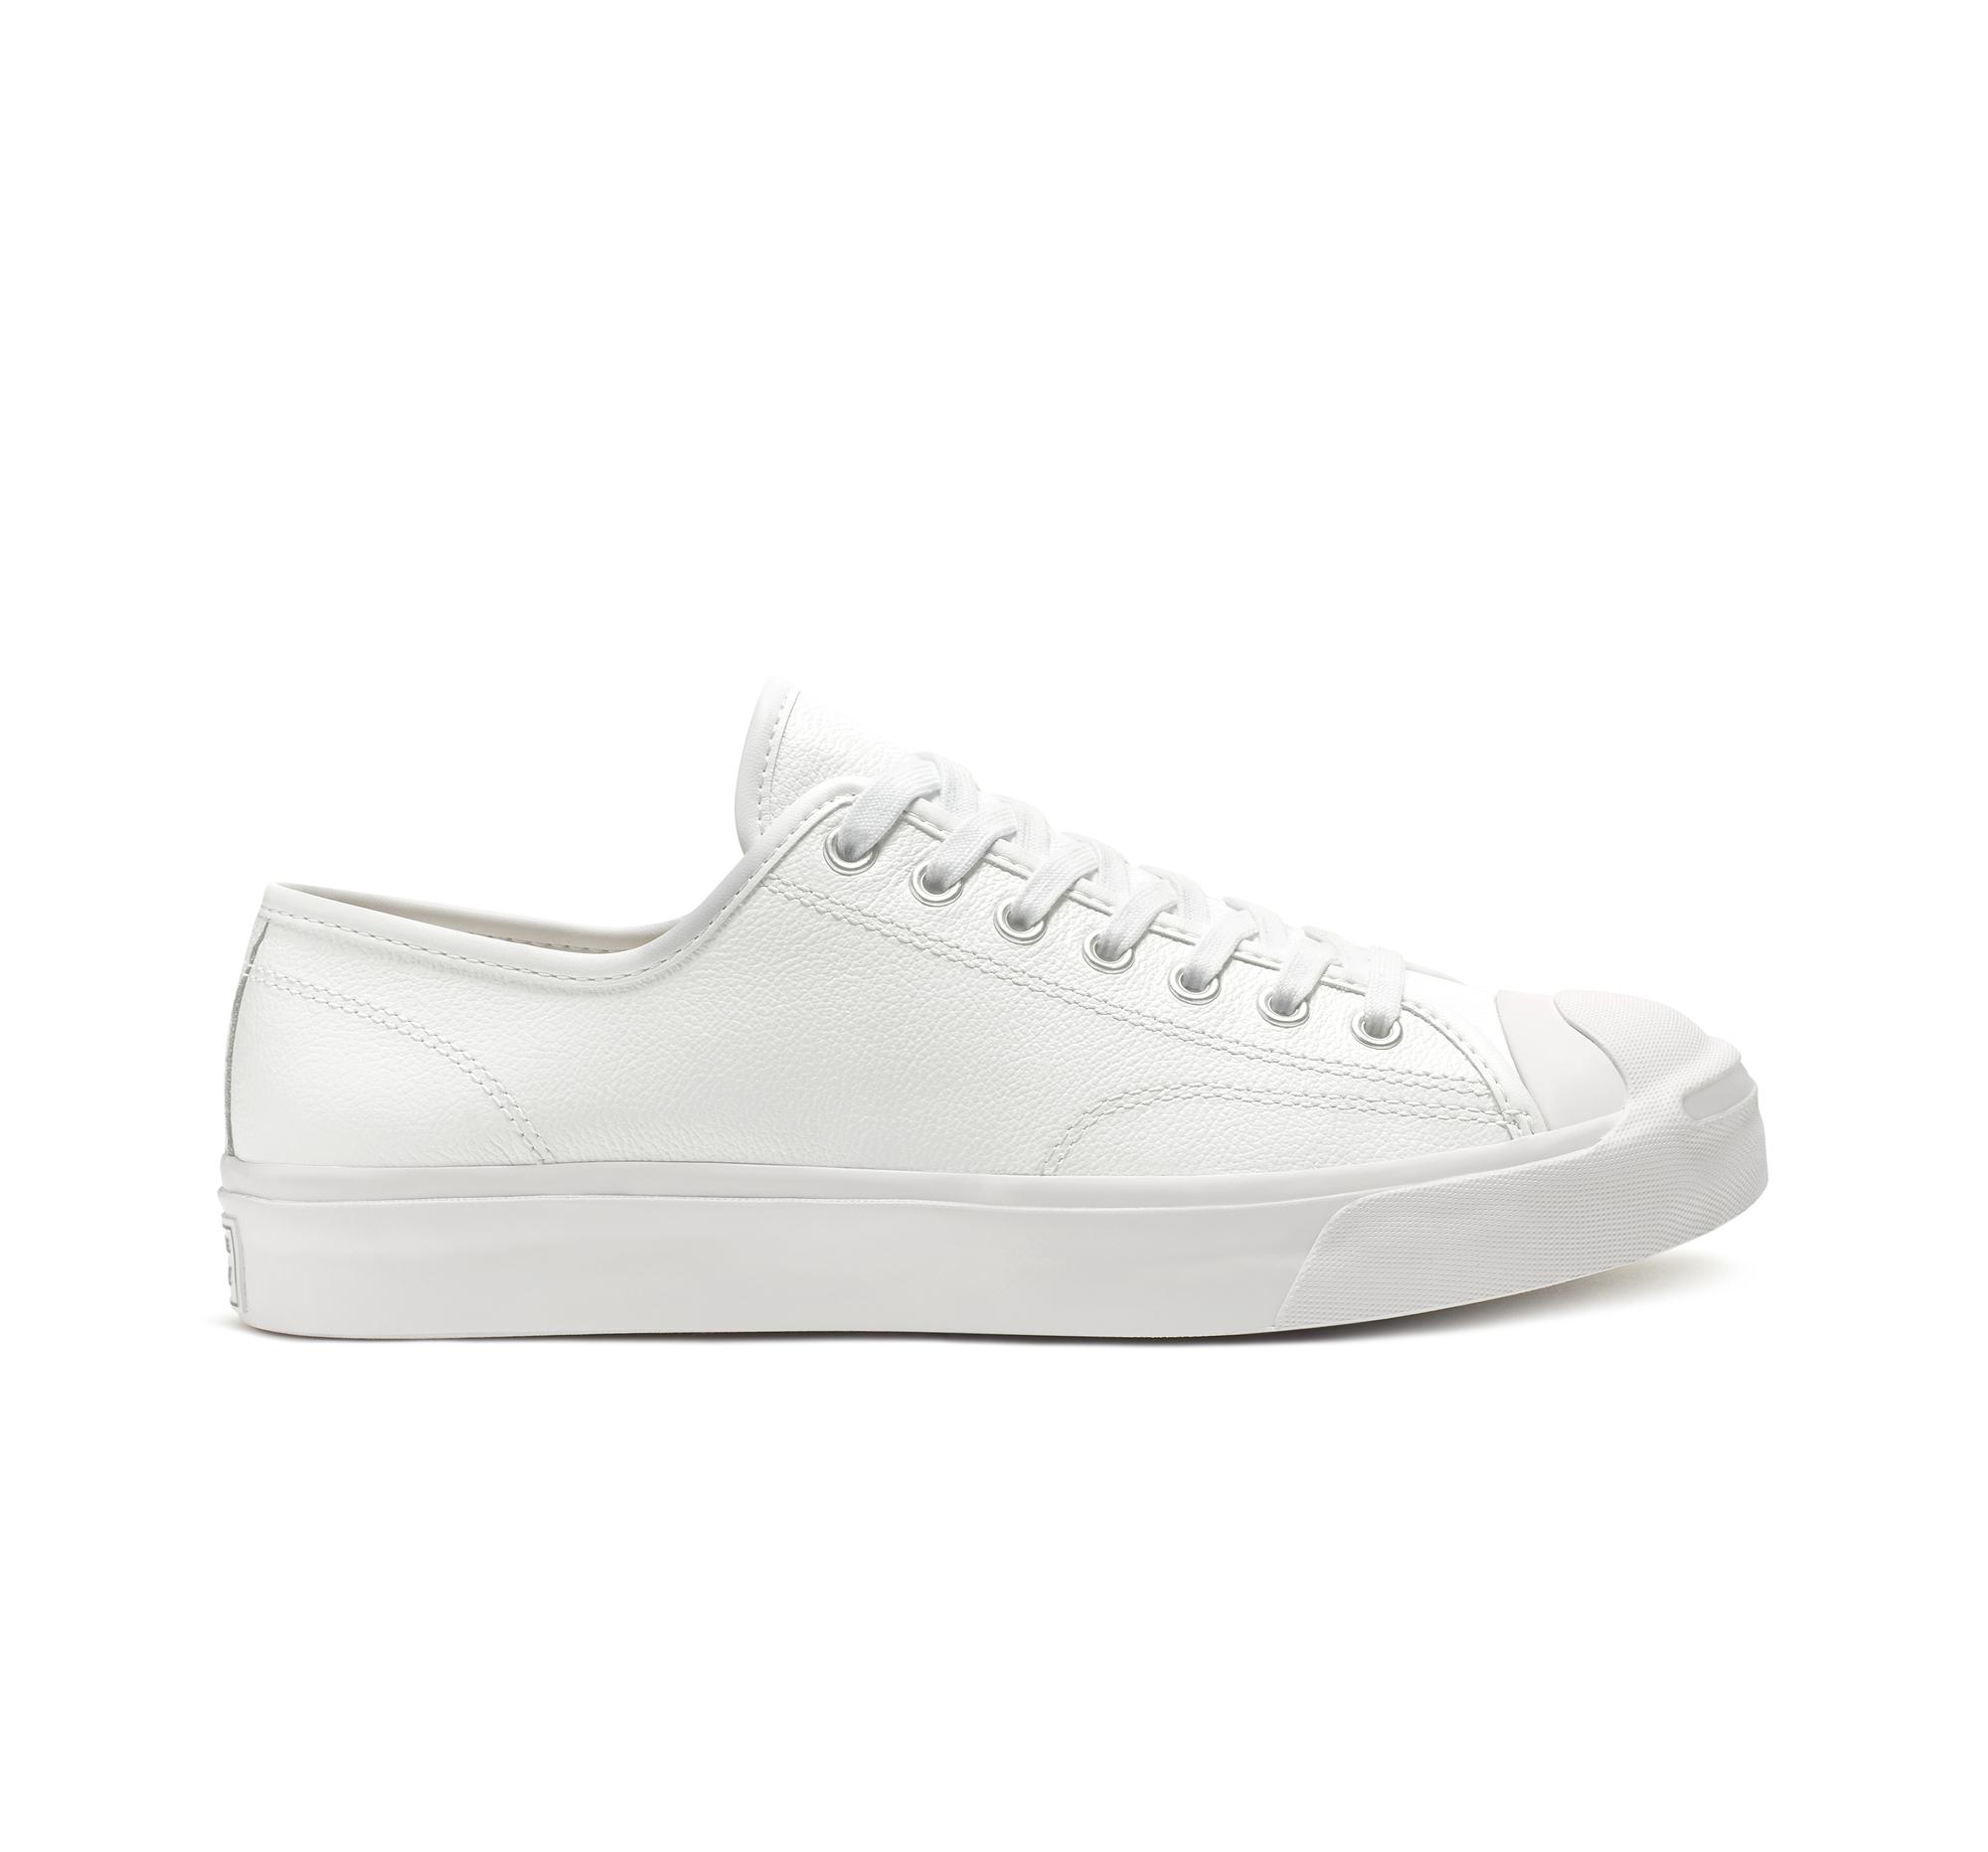 Converse Jack Purcell Leather Casual Sneakers From Finish Line in White/White/White (White) - Save 63% - Lyst